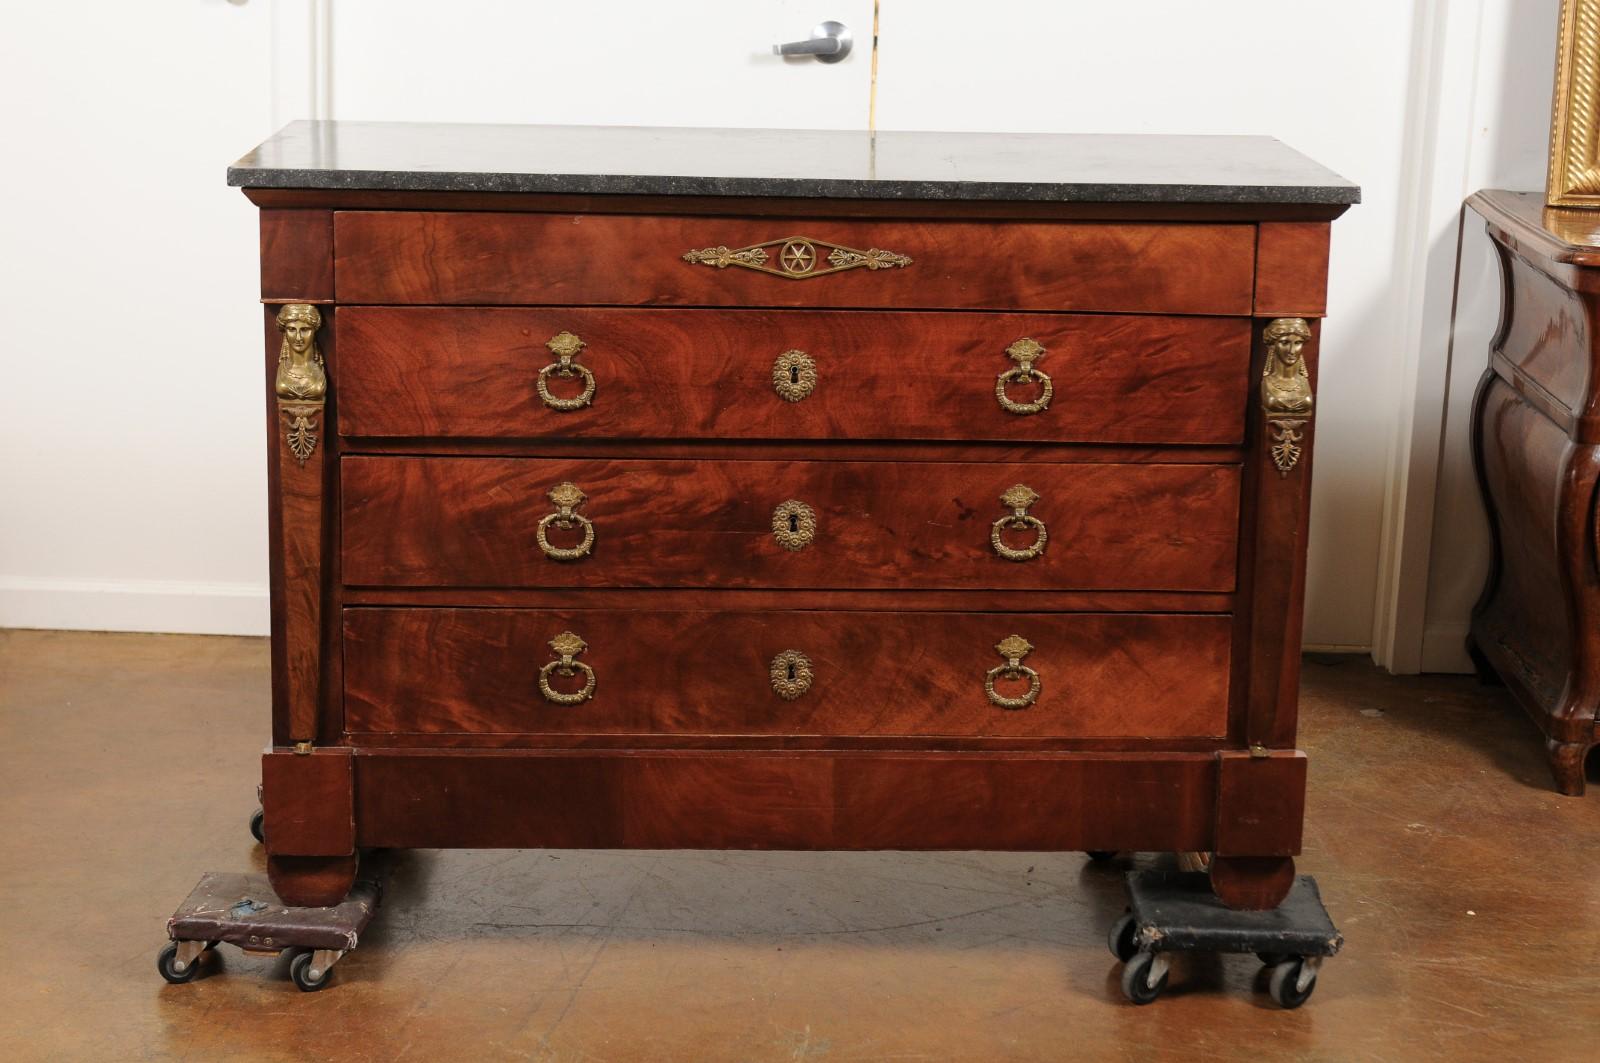 A French Empire mahogany four-drawer commode from the second quarter of the 19th century, with dark grey stone top and bronze mounts. Born at the end of the French Restauration period that saw the return of monarchy after the first Revolution, this